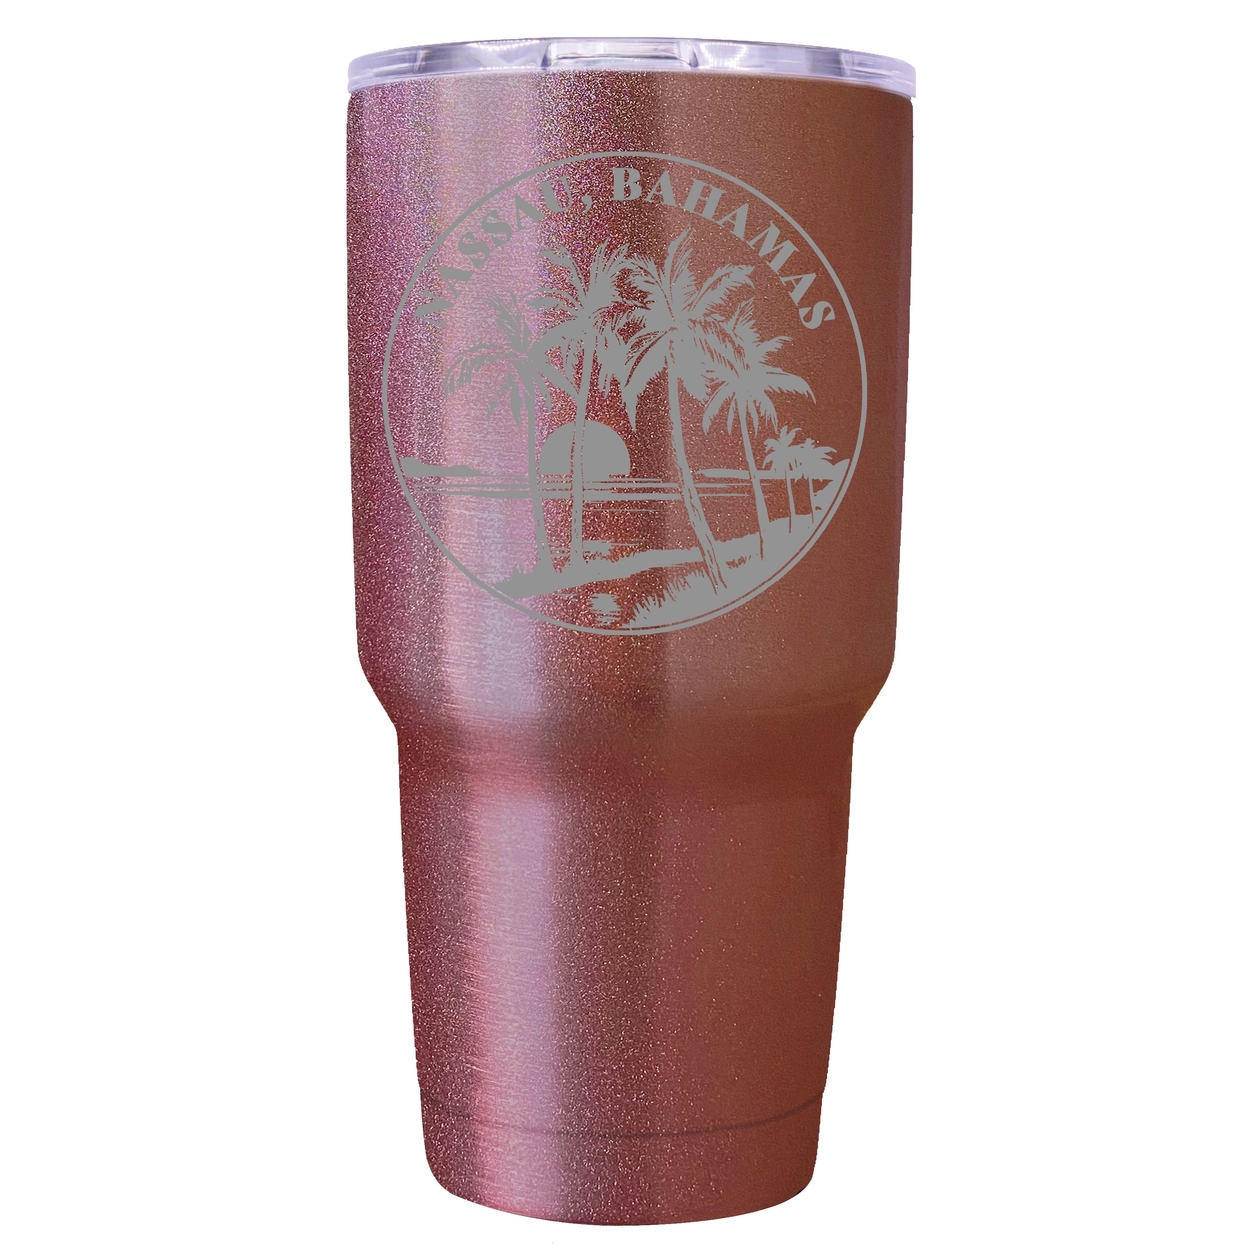 Nassau The Bahamas Souvenir 24 Oz Engraved Insulated Stainless Steel Tumbler - Coral,,2-Pack